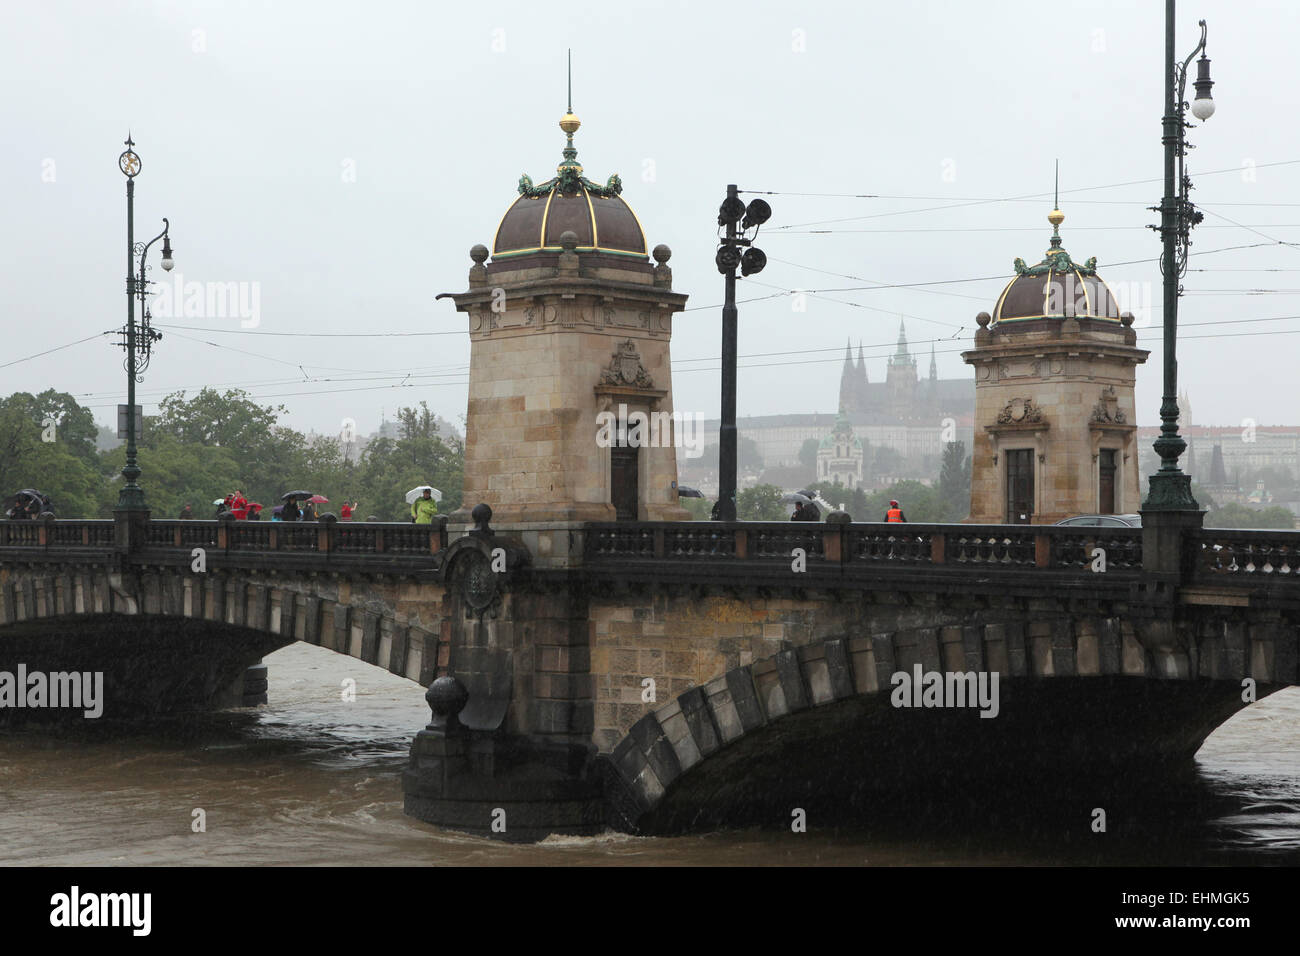 People observe the rising water from the Legion Bridge partially flooded by the swollen Vltava River in Prague, Czech Republic. Prague Castle and St Vitus' Cathedral are seen in the background. Stock Photo